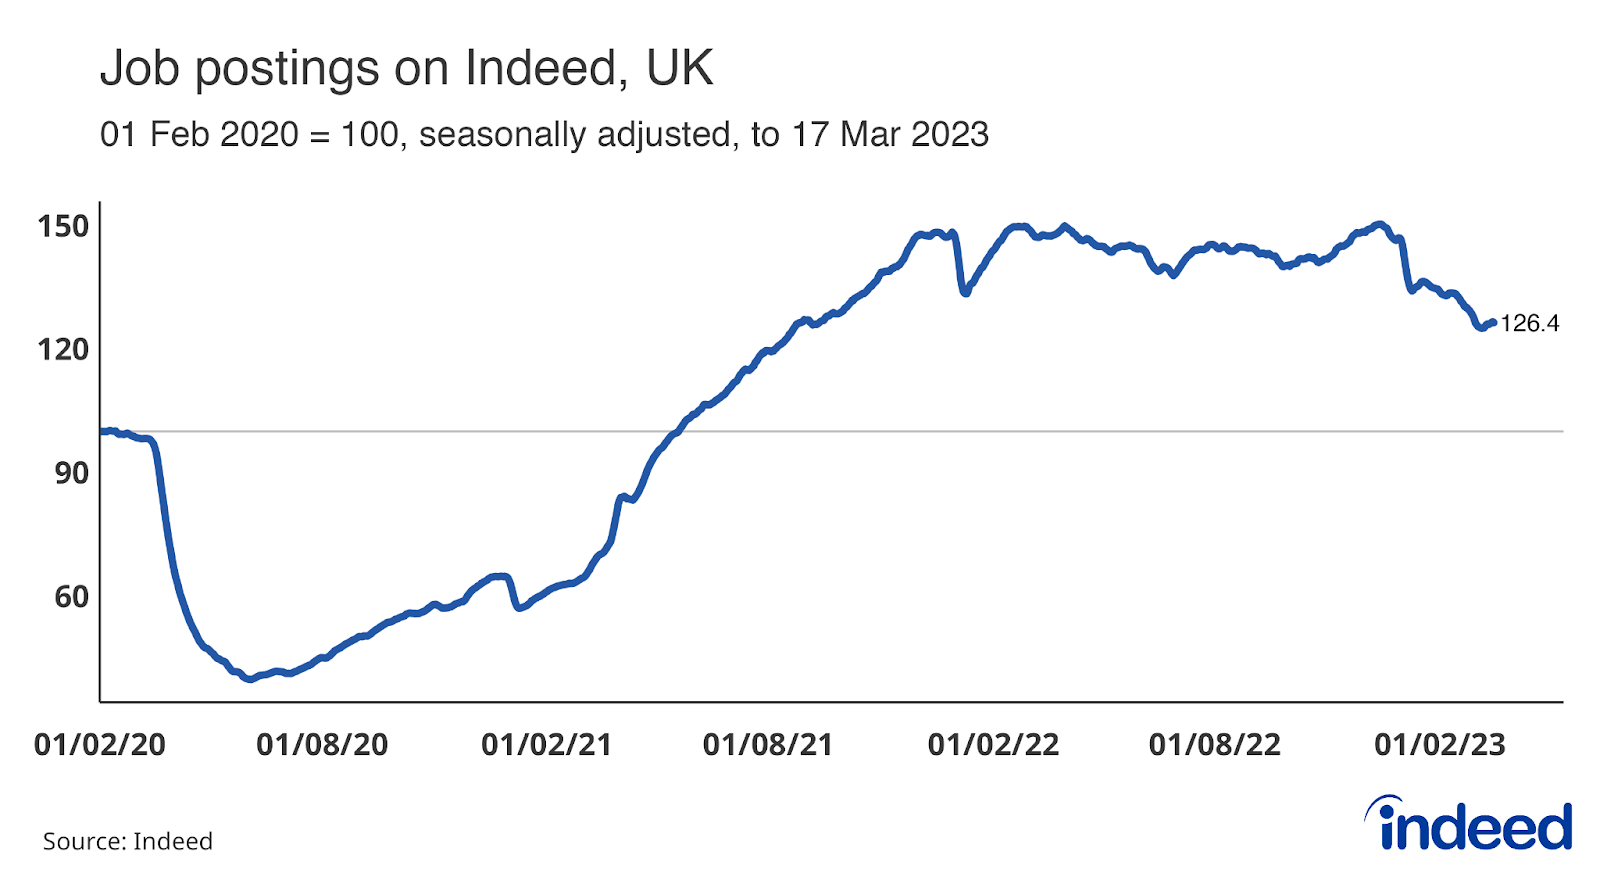 Line chart titled “Job postings on Indeed UK” showing the trend in UK job postings from 1 February 2020 to 10 March 2023.